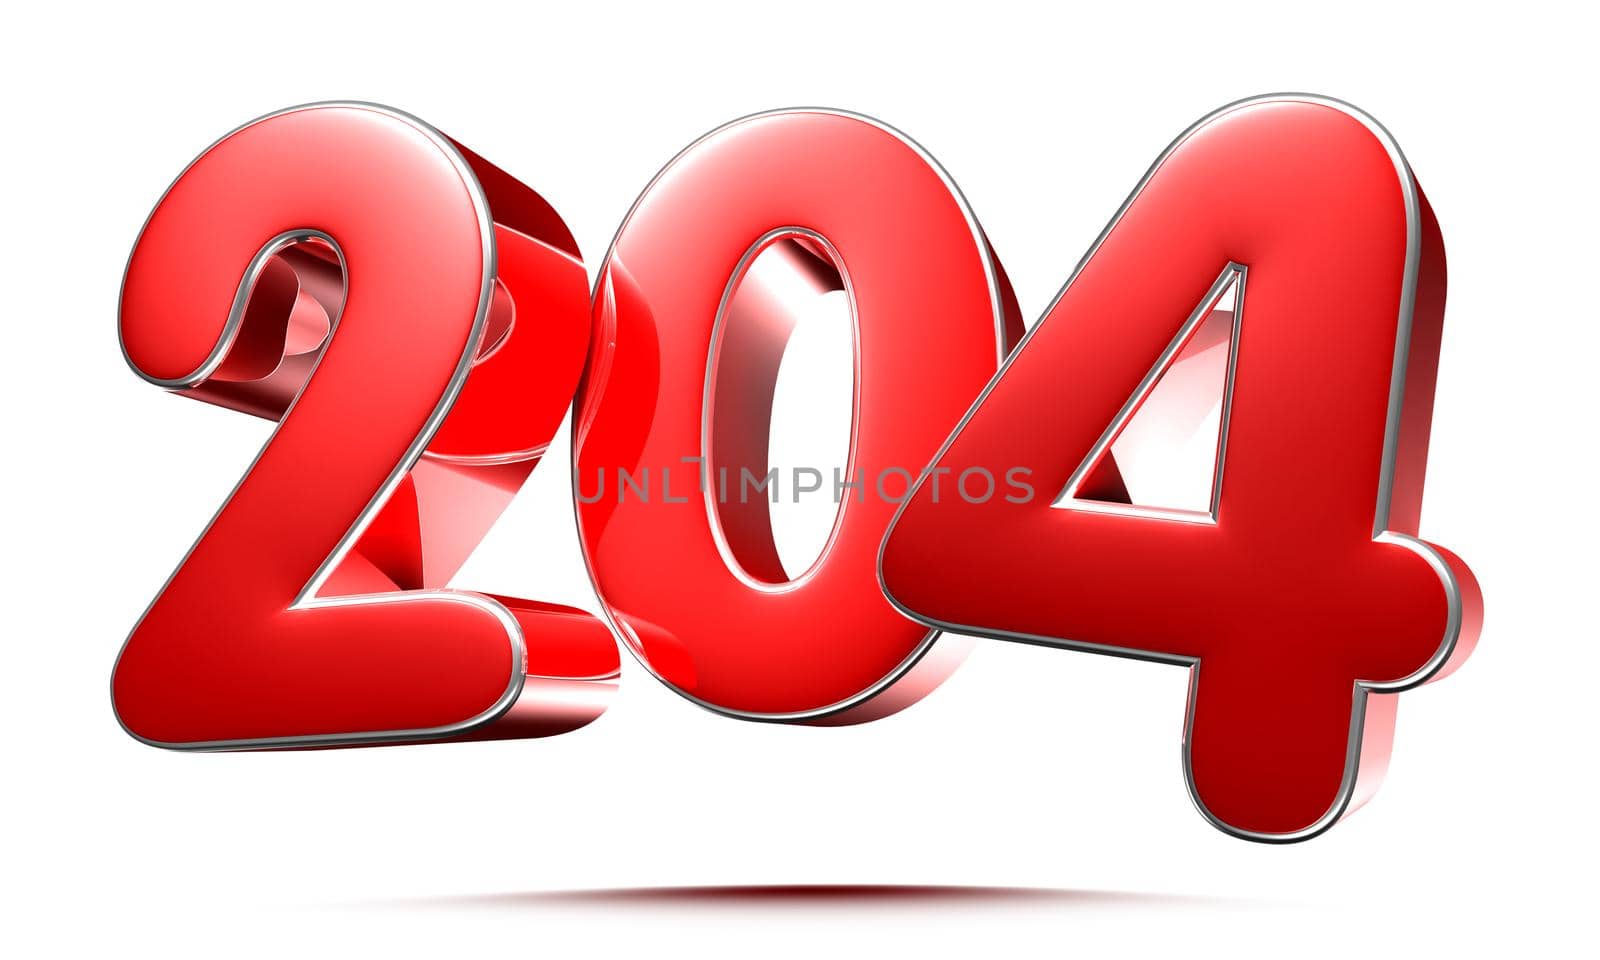 Rounded red numbers 204 on white background 3D illustration with clipping path by thitimontoyai